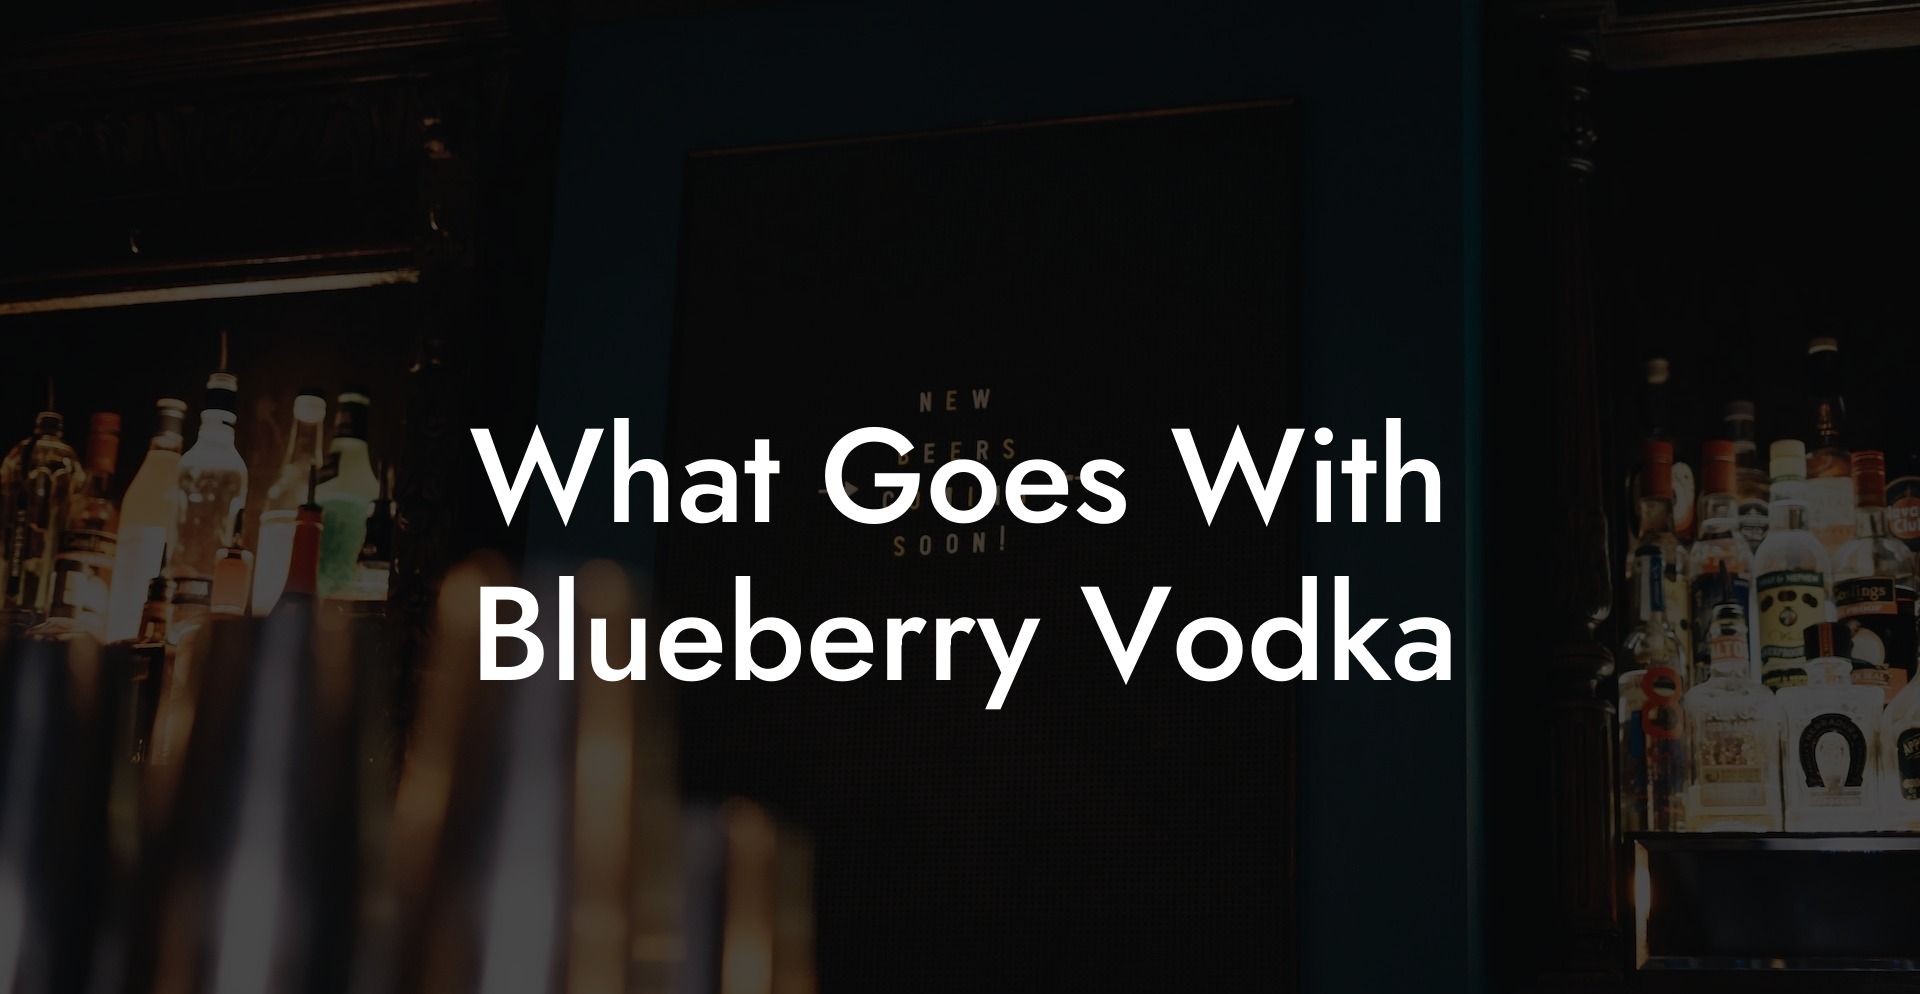 What Goes With Blueberry Vodka